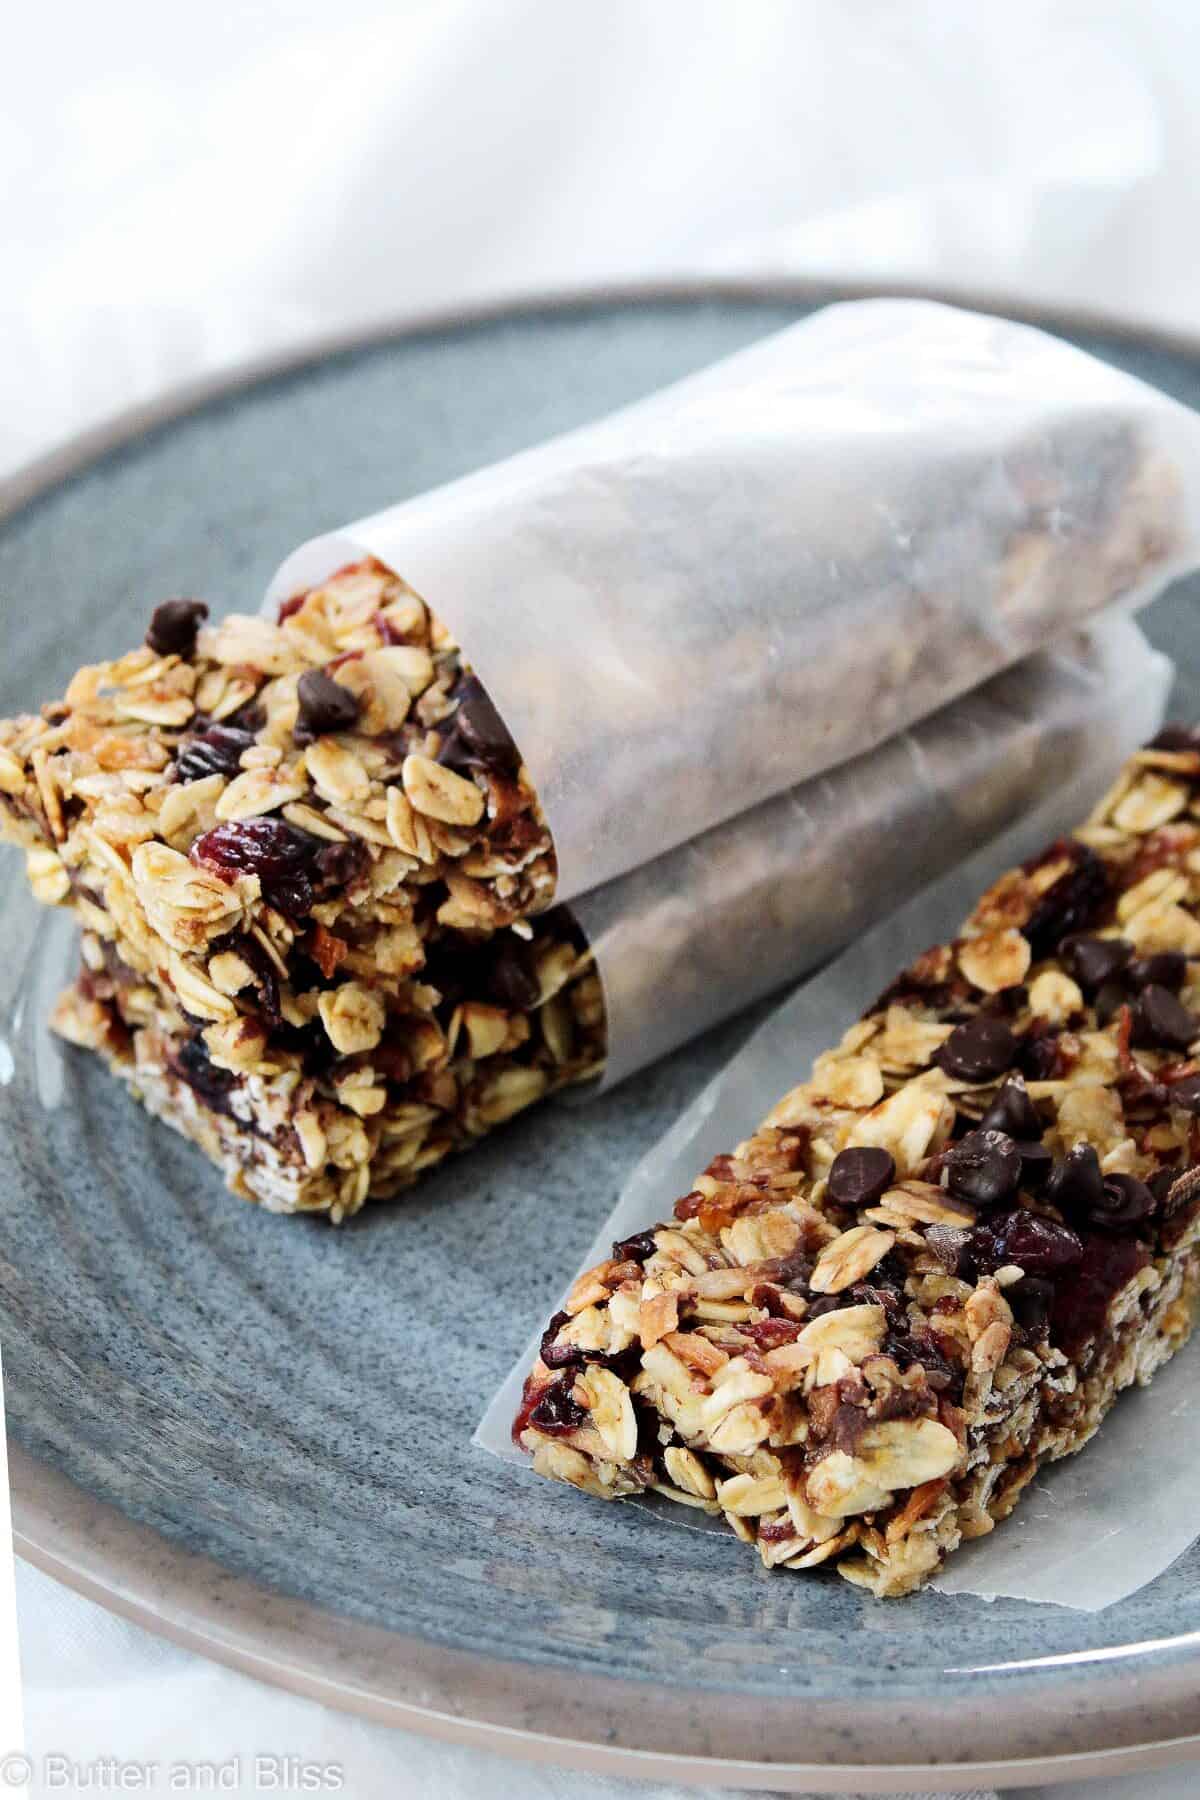 Cranberry and chocolate granola bars stacked on a blue plate